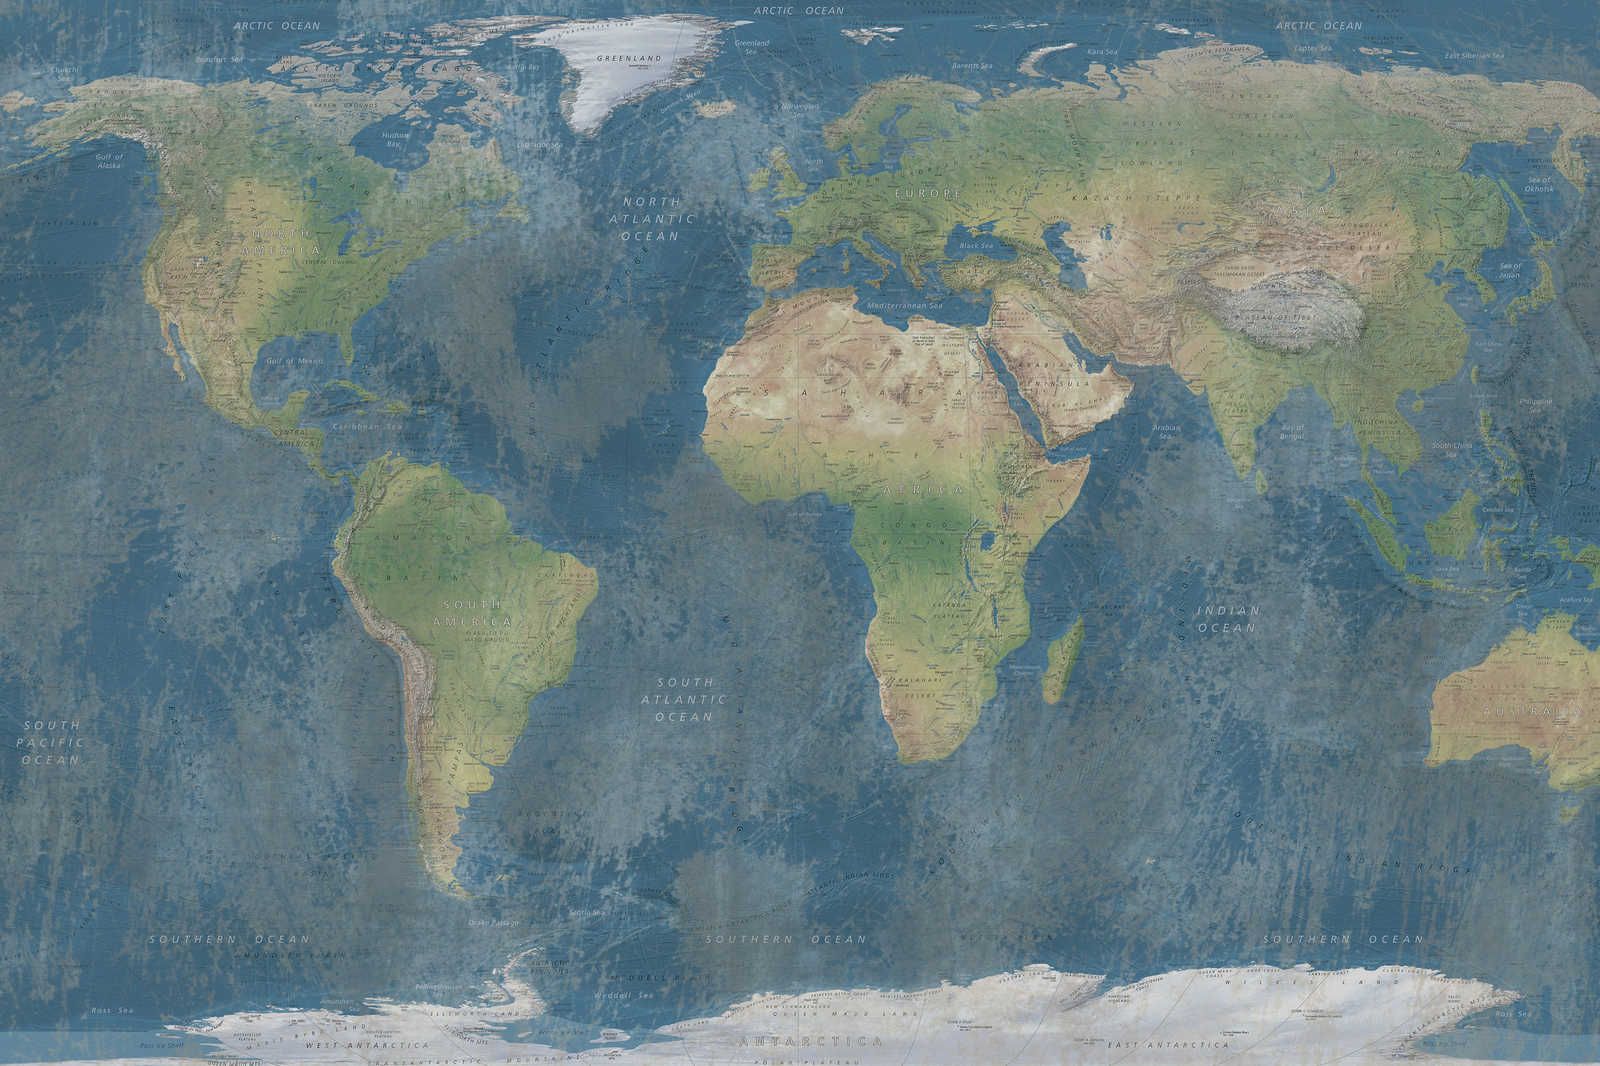             Canvas painting World map in natural colouring - 0,90 m x 0,60 m
        